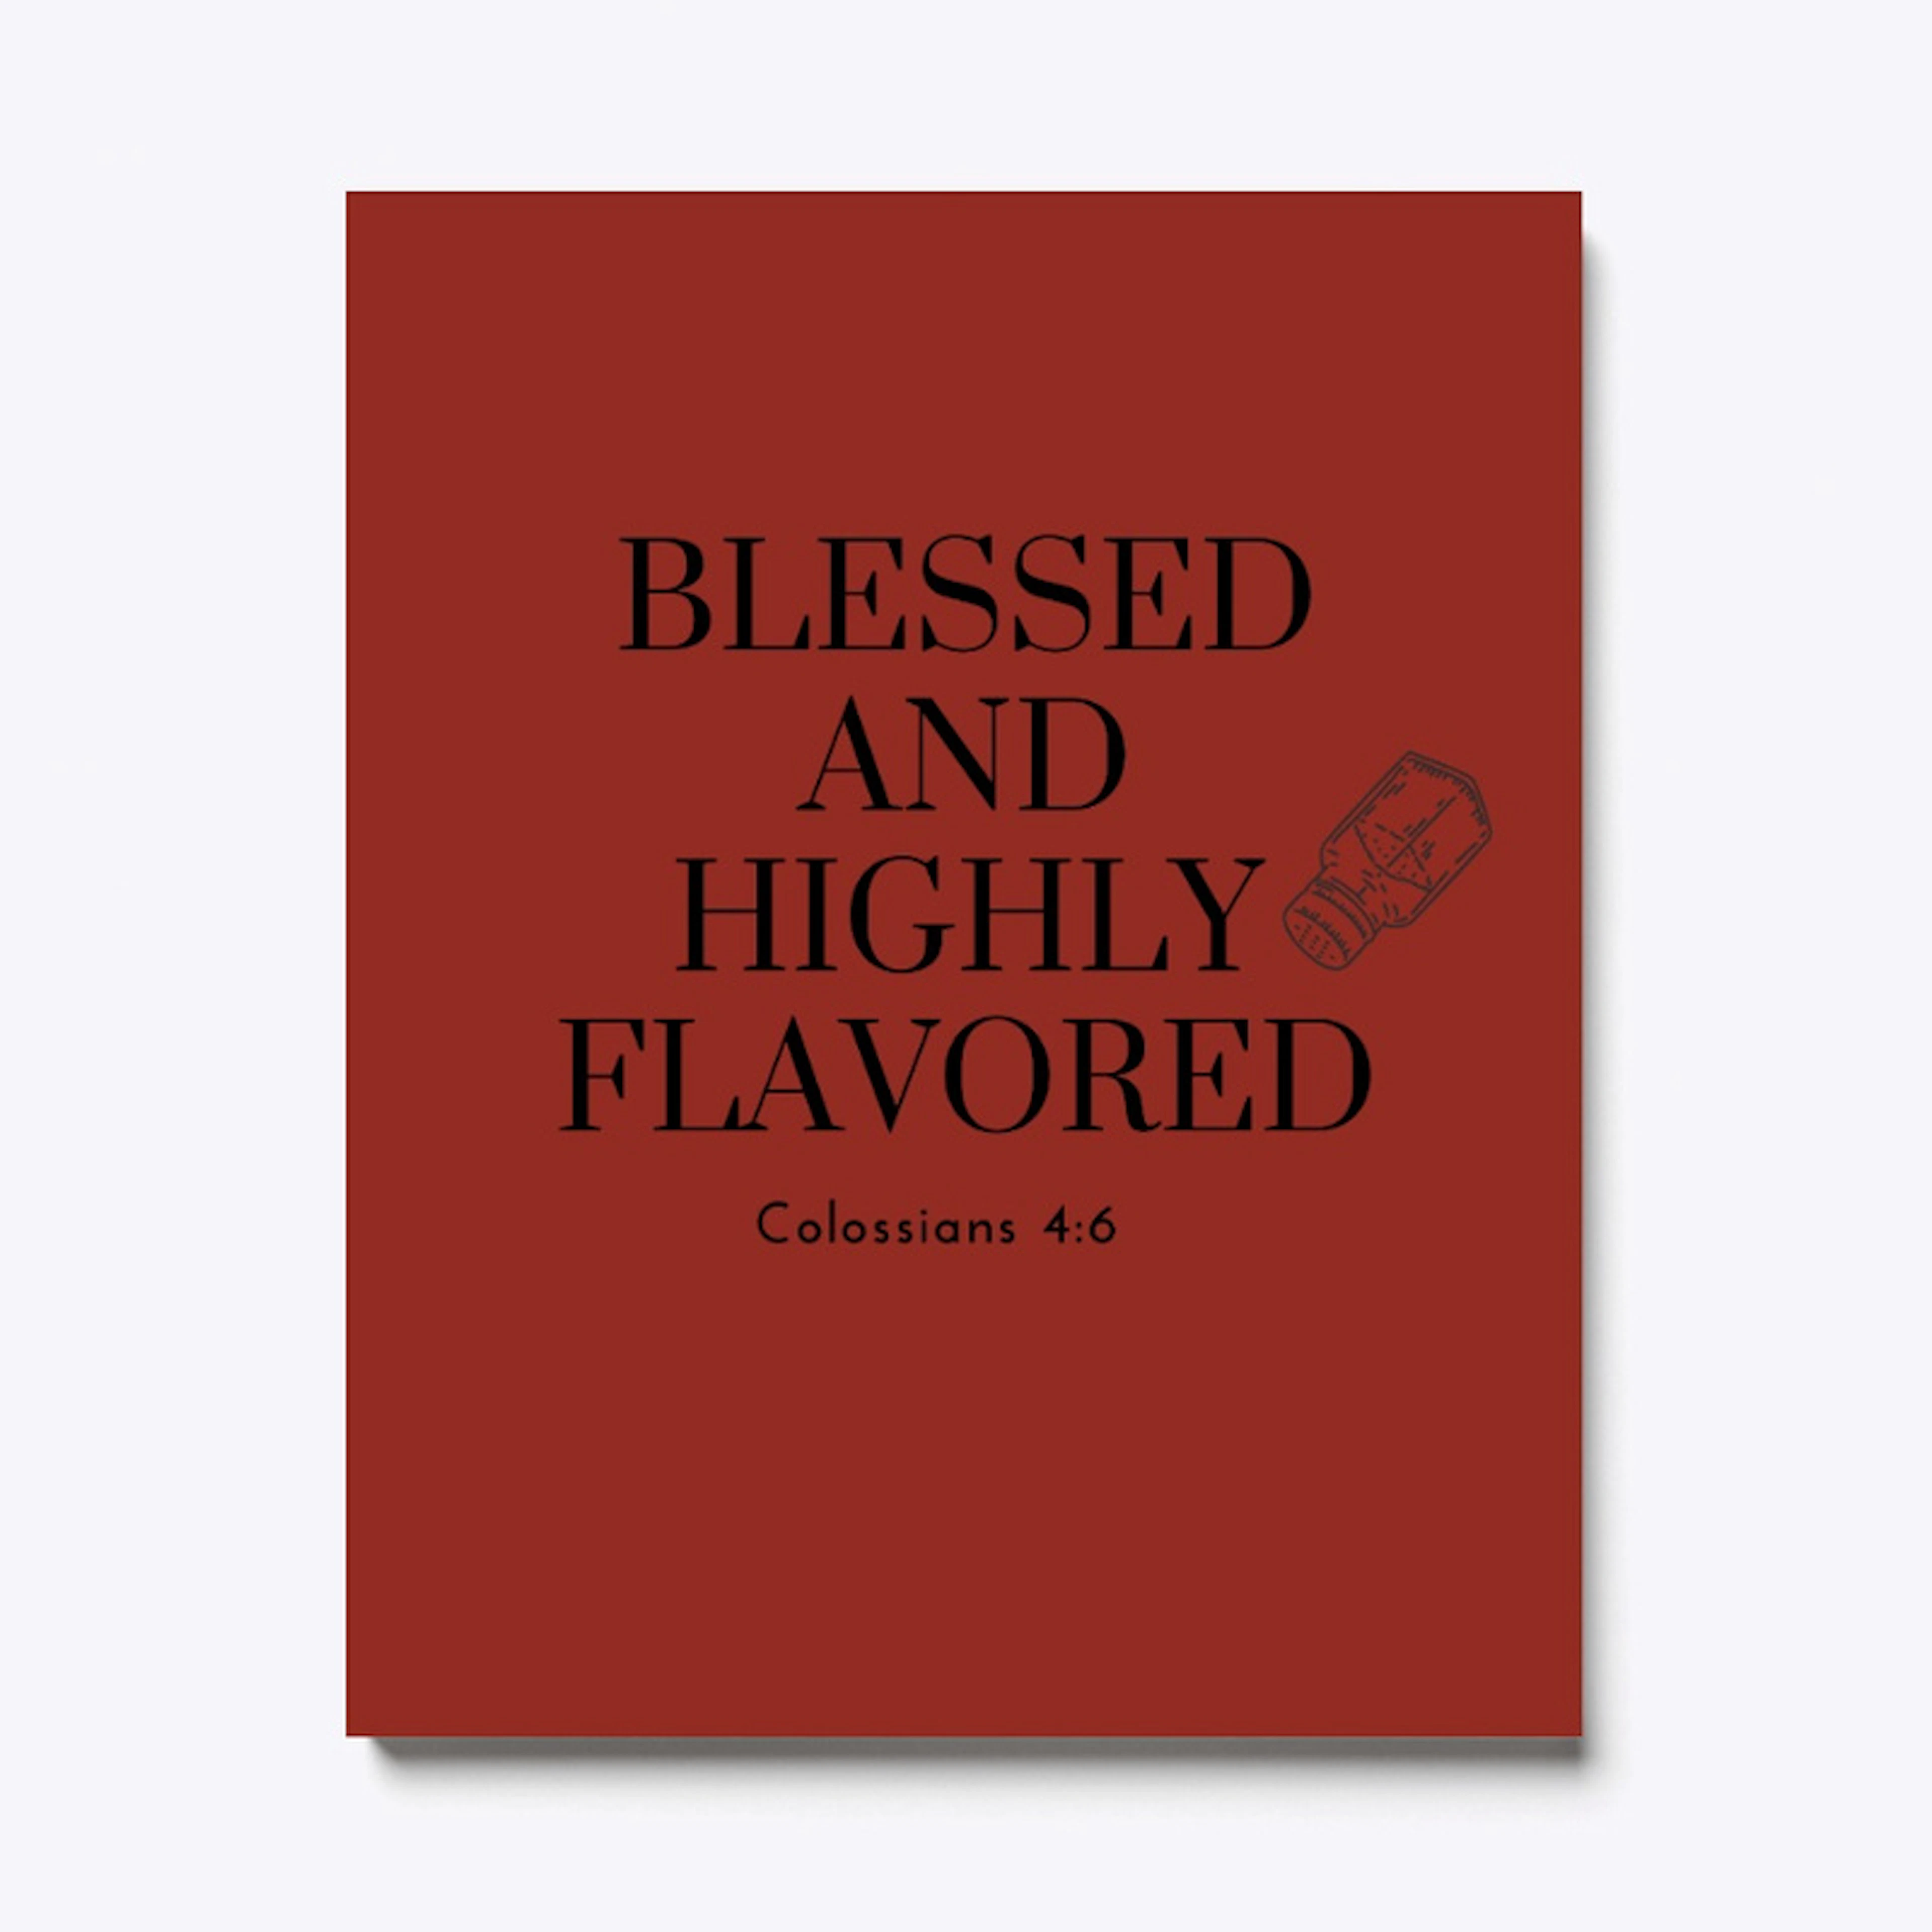 BLESSED AND HIGHLY FLAVORED